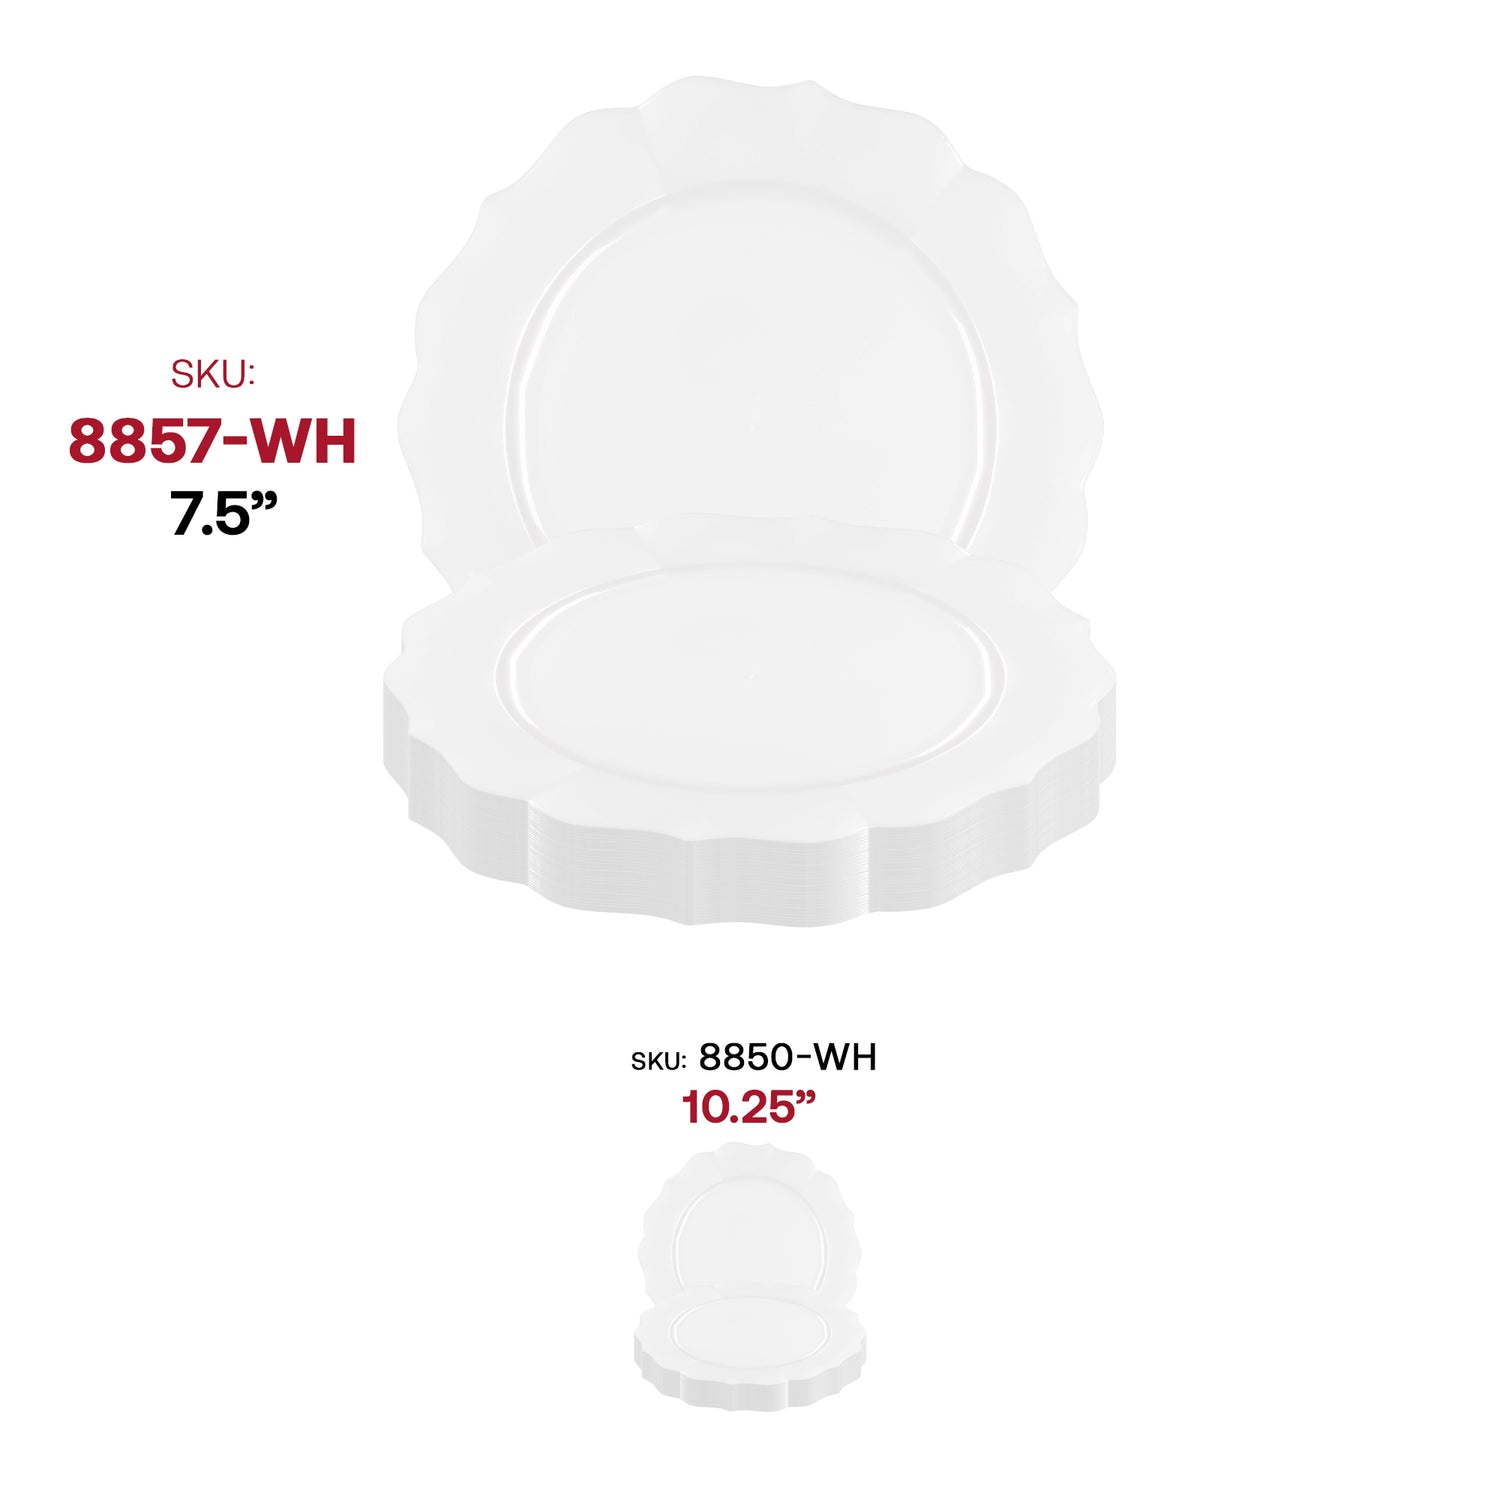 Pearl White Round Lotus Disposable Plastic Appetizer/Salad Plates (7.5") SKU | The Kaya Collection